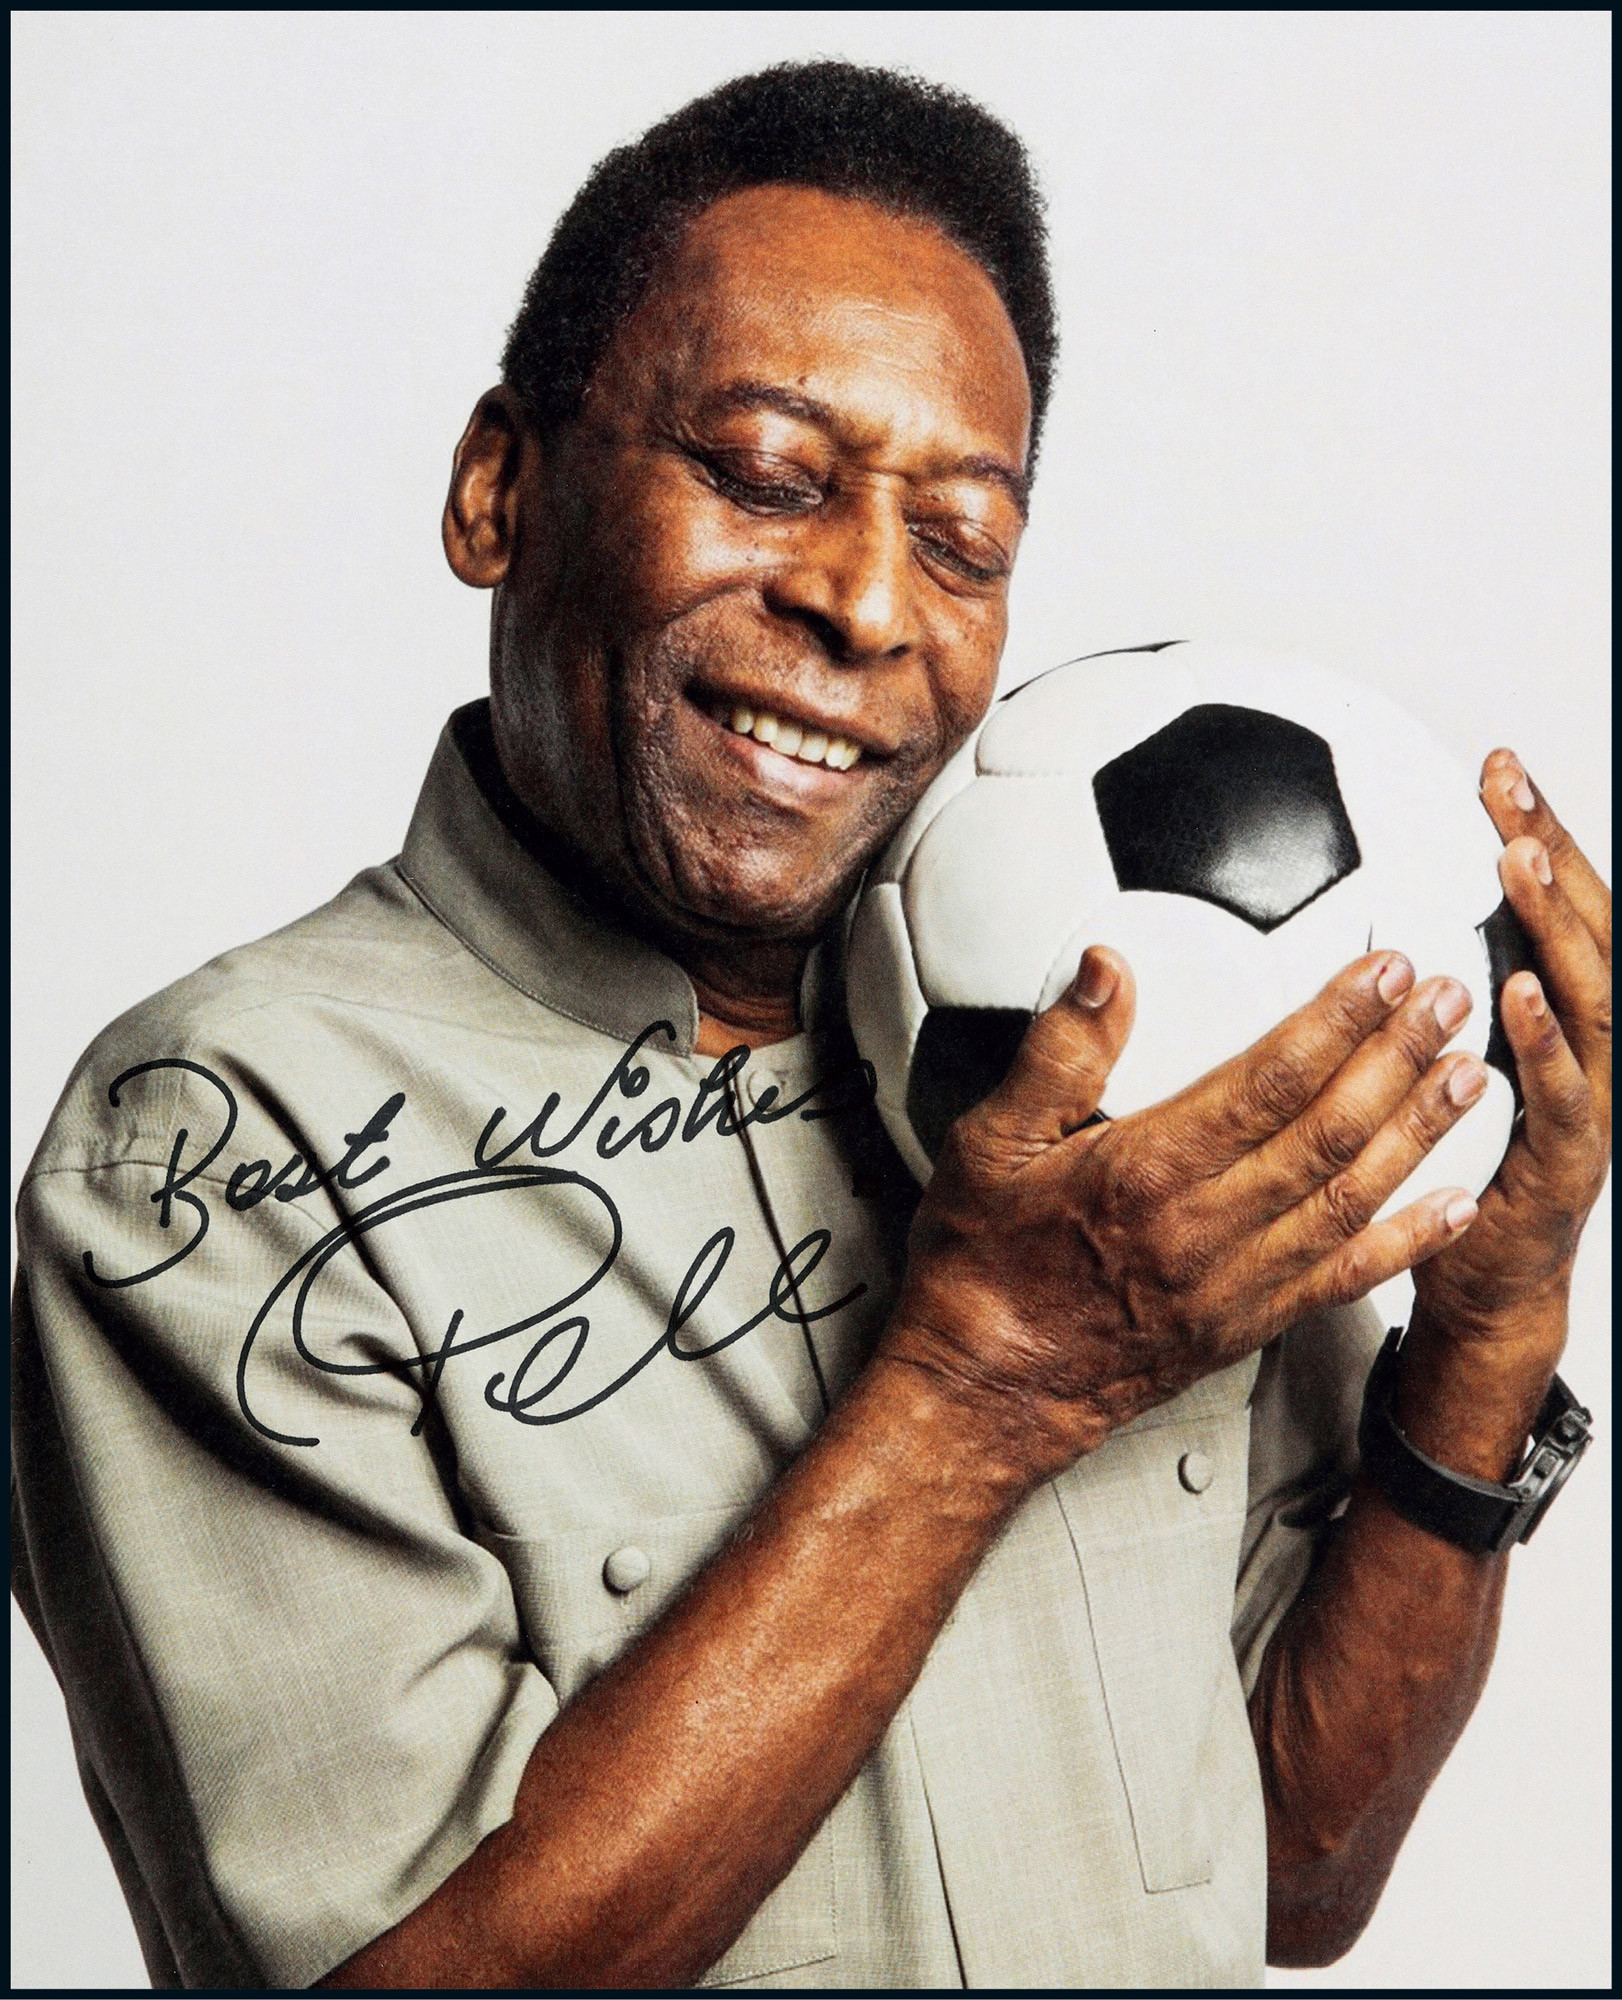 The autographed photo of Pele, the “king of football”, with certificate